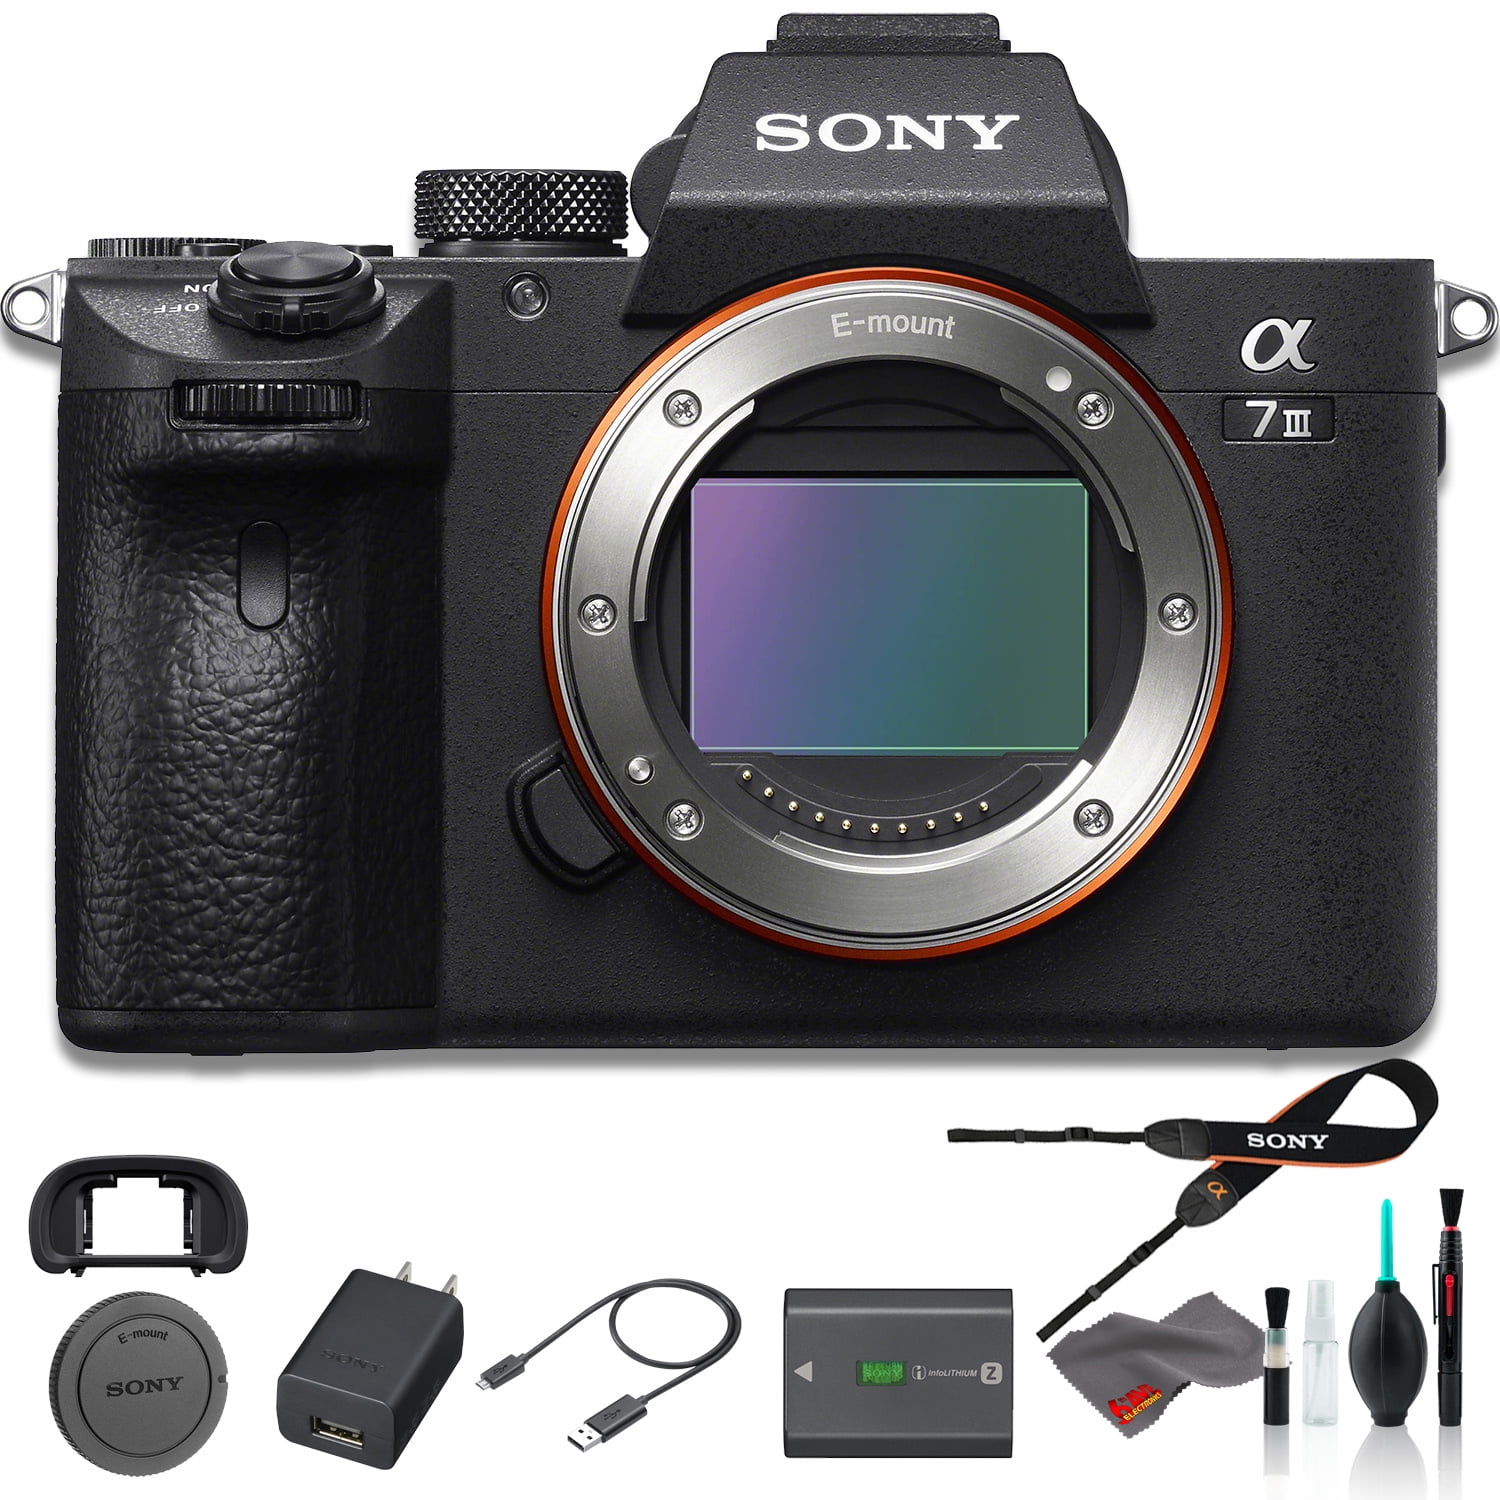 Sony Alpha a6000 Mirrorless Digital Camera 24.3 MP SLR Camera(📷) with  3.0-Inch LCD + 16-50mm Lens (Black) +Buzz-Photo Essential Kit